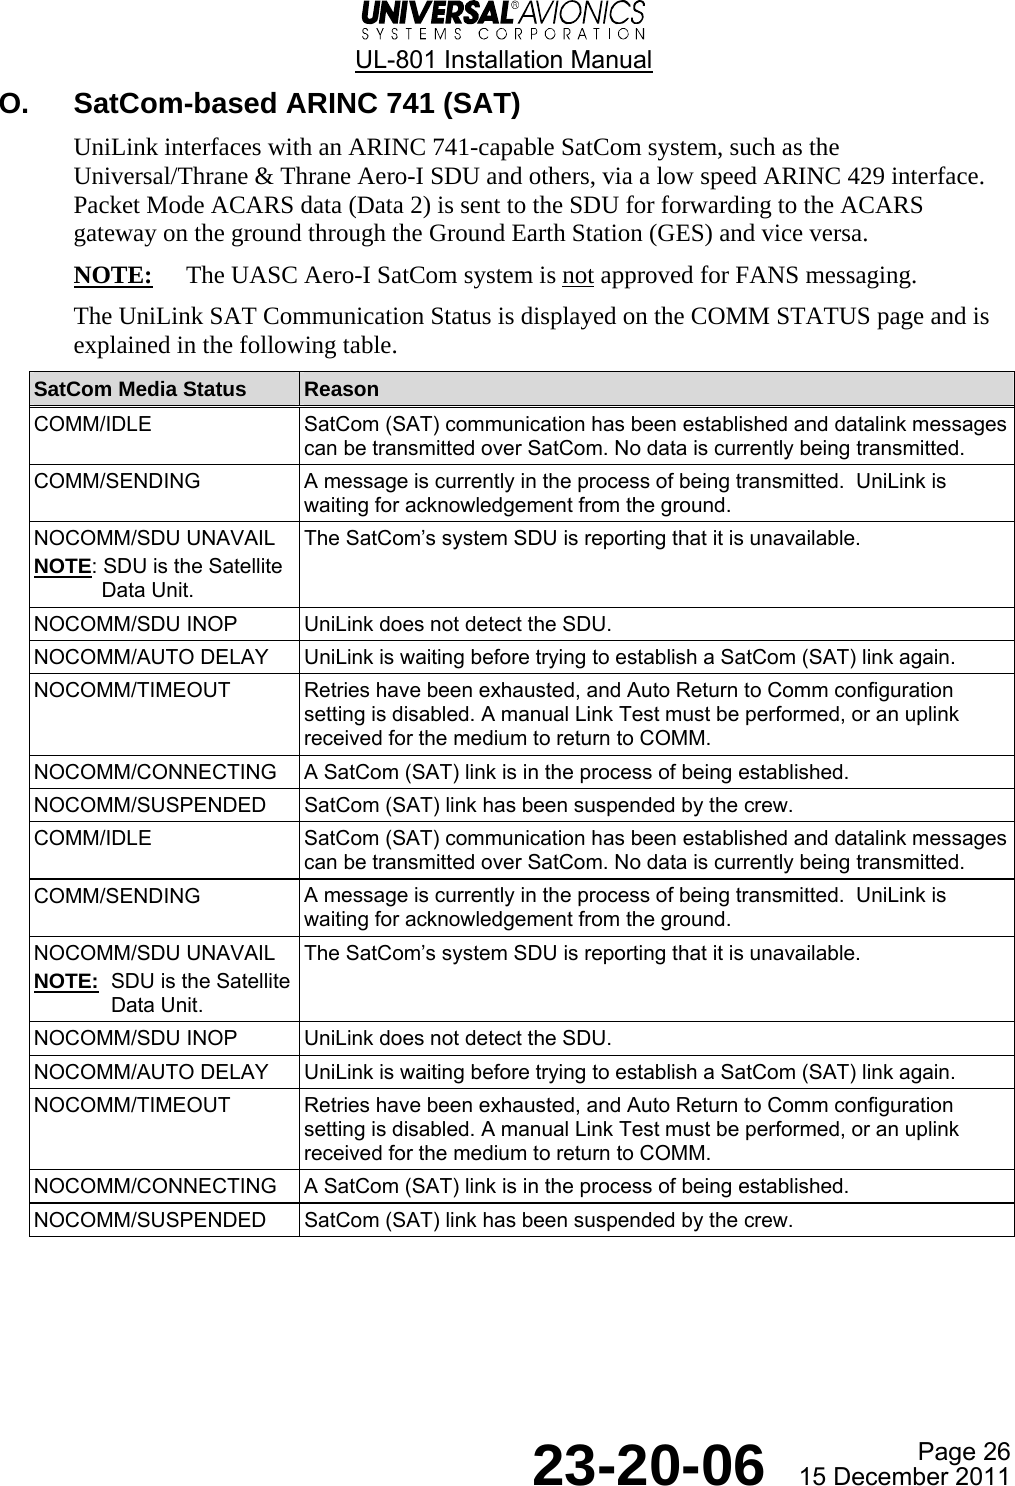  UL-801 Installation Manual  Page 26  23-20-06  15 December 2011 O.  SatCom-based ARINC 741 (SAT) UniLink interfaces with an ARINC 741-capable SatCom system, such as the Universal/Thrane &amp; Thrane Aero-I SDU and others, via a low speed ARINC 429 interface. Packet Mode ACARS data (Data 2) is sent to the SDU for forwarding to the ACARS gateway on the ground through the Ground Earth Station (GES) and vice versa. NOTE:  The UASC Aero-I SatCom system is not approved for FANS messaging. The UniLink SAT Communication Status is displayed on the COMM STATUS page and is explained in the following table. SatCom Media Status  Reason COMM/IDLE  SatCom (SAT) communication has been established and datalink messages can be transmitted over SatCom. No data is currently being transmitted. COMM/SENDING  A message is currently in the process of being transmitted.  UniLink is waiting for acknowledgement from the ground. NOCOMM/SDU UNAVAIL NOTE: SDU is the Satellite Data Unit. The SatCom’s system SDU is reporting that it is unavailable. NOCOMM/SDU INOP  UniLink does not detect the SDU. NOCOMM/AUTO DELAY  UniLink is waiting before trying to establish a SatCom (SAT) link again.  NOCOMM/TIMEOUT  Retries have been exhausted, and Auto Return to Comm configuration setting is disabled. A manual Link Test must be performed, or an uplink received for the medium to return to COMM. NOCOMM/CONNECTING  A SatCom (SAT) link is in the process of being established. NOCOMM/SUSPENDED  SatCom (SAT) link has been suspended by the crew. COMM/IDLE  SatCom (SAT) communication has been established and datalink messages can be transmitted over SatCom. No data is currently being transmitted. COMM/SENDING  A message is currently in the process of being transmitted.  UniLink is waiting for acknowledgement from the ground. NOCOMM/SDU UNAVAIL NOTE:  SDU is the Satellite Data Unit. The SatCom’s system SDU is reporting that it is unavailable. NOCOMM/SDU INOP  UniLink does not detect the SDU. NOCOMM/AUTO DELAY  UniLink is waiting before trying to establish a SatCom (SAT) link again.  NOCOMM/TIMEOUT  Retries have been exhausted, and Auto Return to Comm configuration setting is disabled. A manual Link Test must be performed, or an uplink received for the medium to return to COMM. NOCOMM/CONNECTING  A SatCom (SAT) link is in the process of being established. NOCOMM/SUSPENDED  SatCom (SAT) link has been suspended by the crew.    